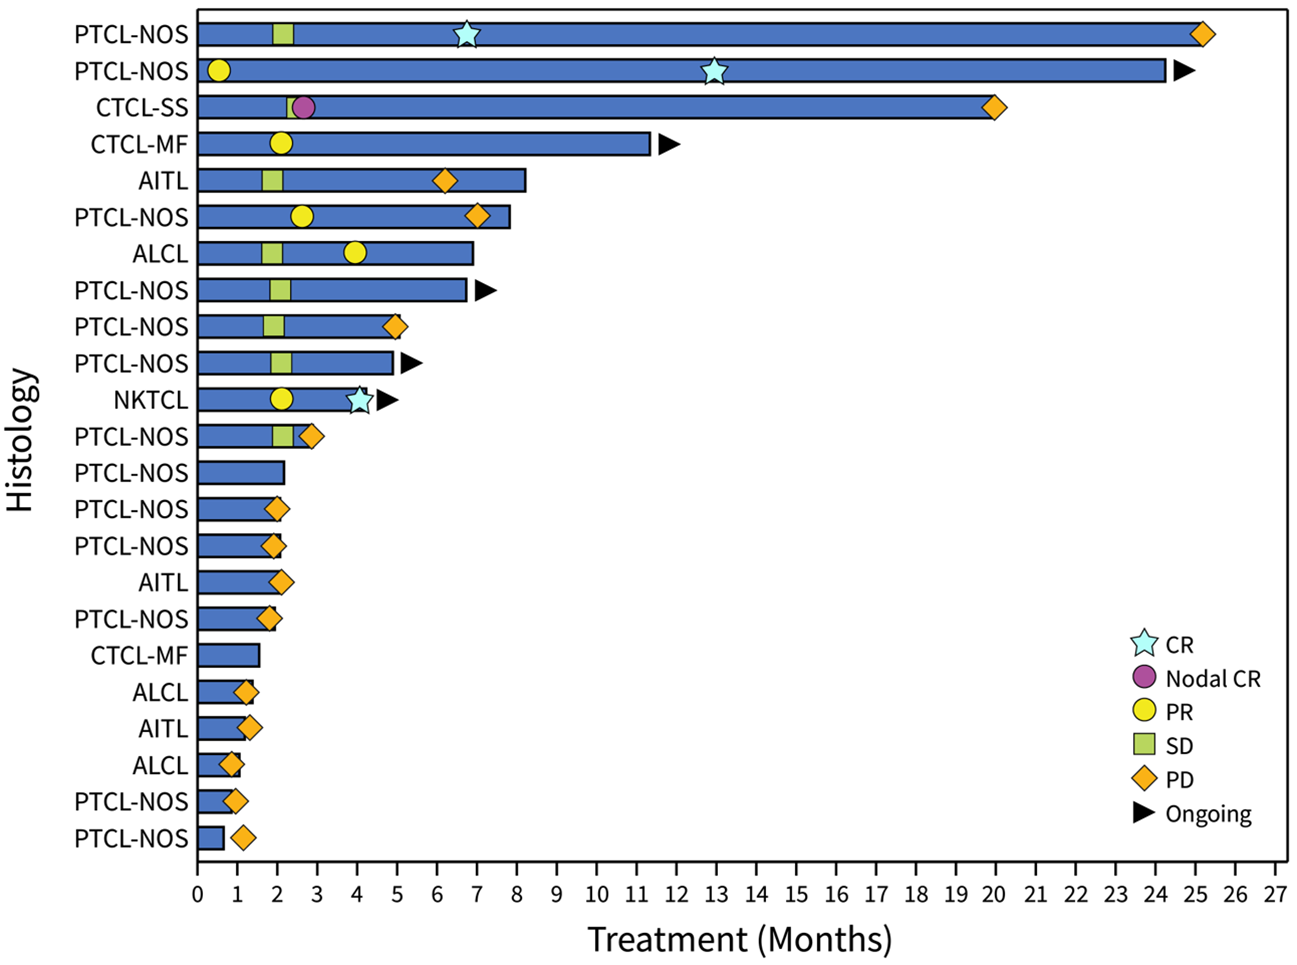 Swimmer Plot of Eligible Patient Population Demonstrating Response and Time on Therapy. Tumor histologies, as of January 22, 2024, are also shown indicating different types of T cell lymphoma. PTCL-NOS, peripheral T cell lymphoma not otherwise specified; CTCL, cutaneous T cell lymphoma of either Sezary or mycosis fungoides type; NKTCL, natural killer cell T cell lymphoma; ALCL, anaplastic large cell lymphoma.